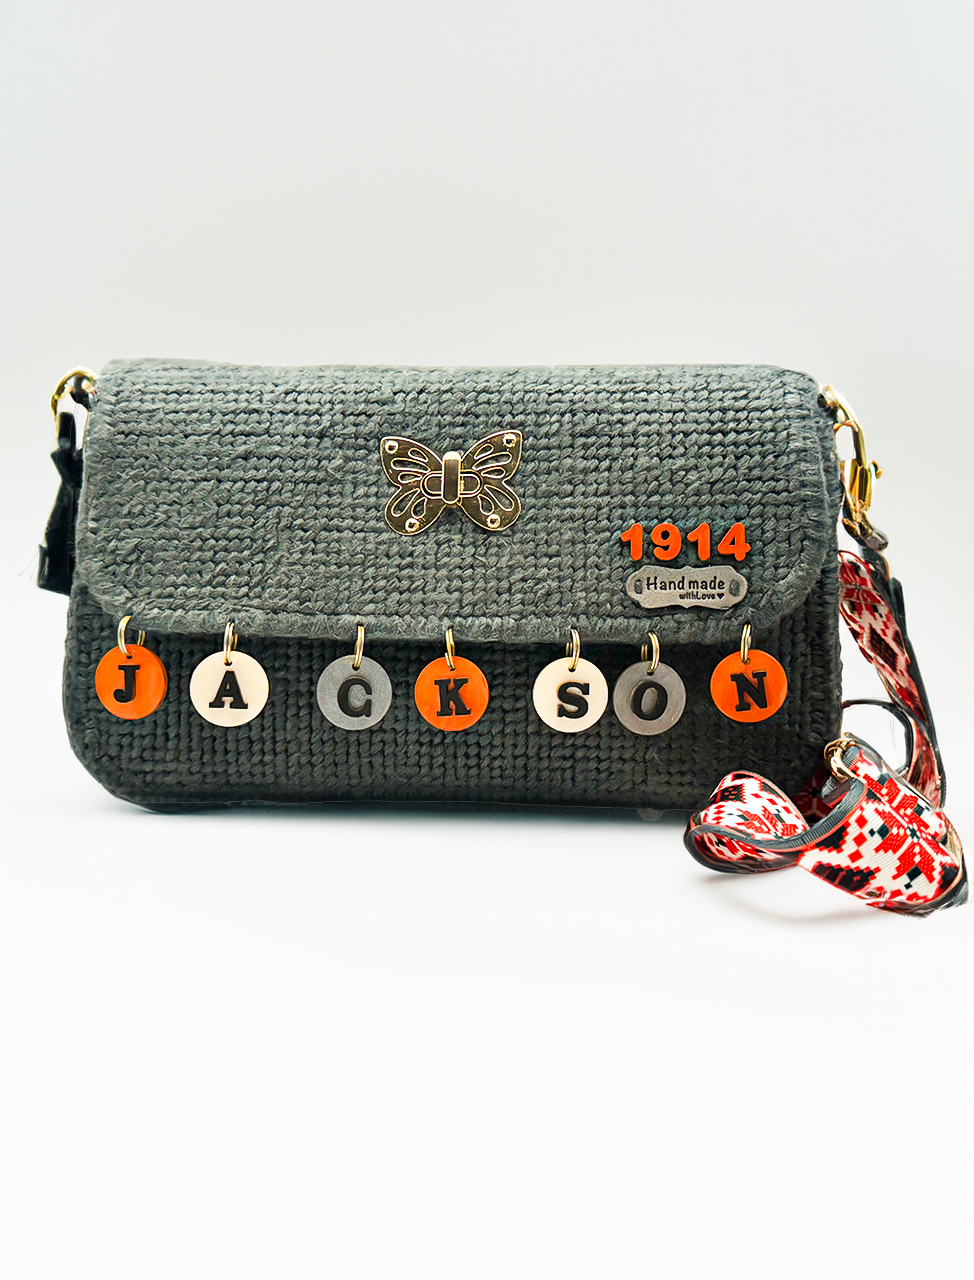 Fluttering with Charm: Crocheted Handbag with Delicate Butterfly